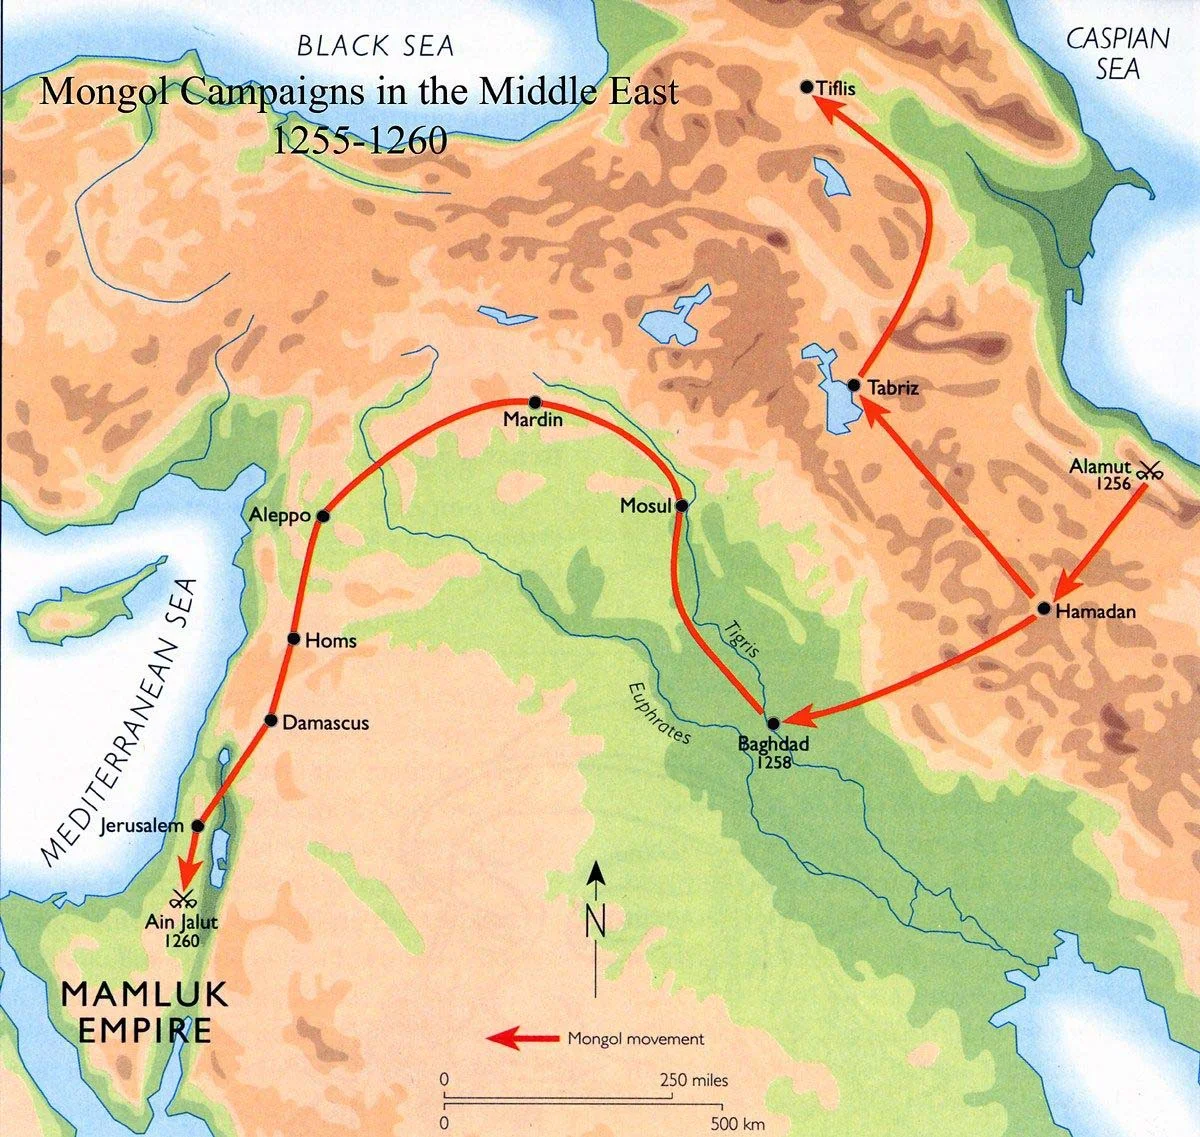 Mongol Army Path of Attack